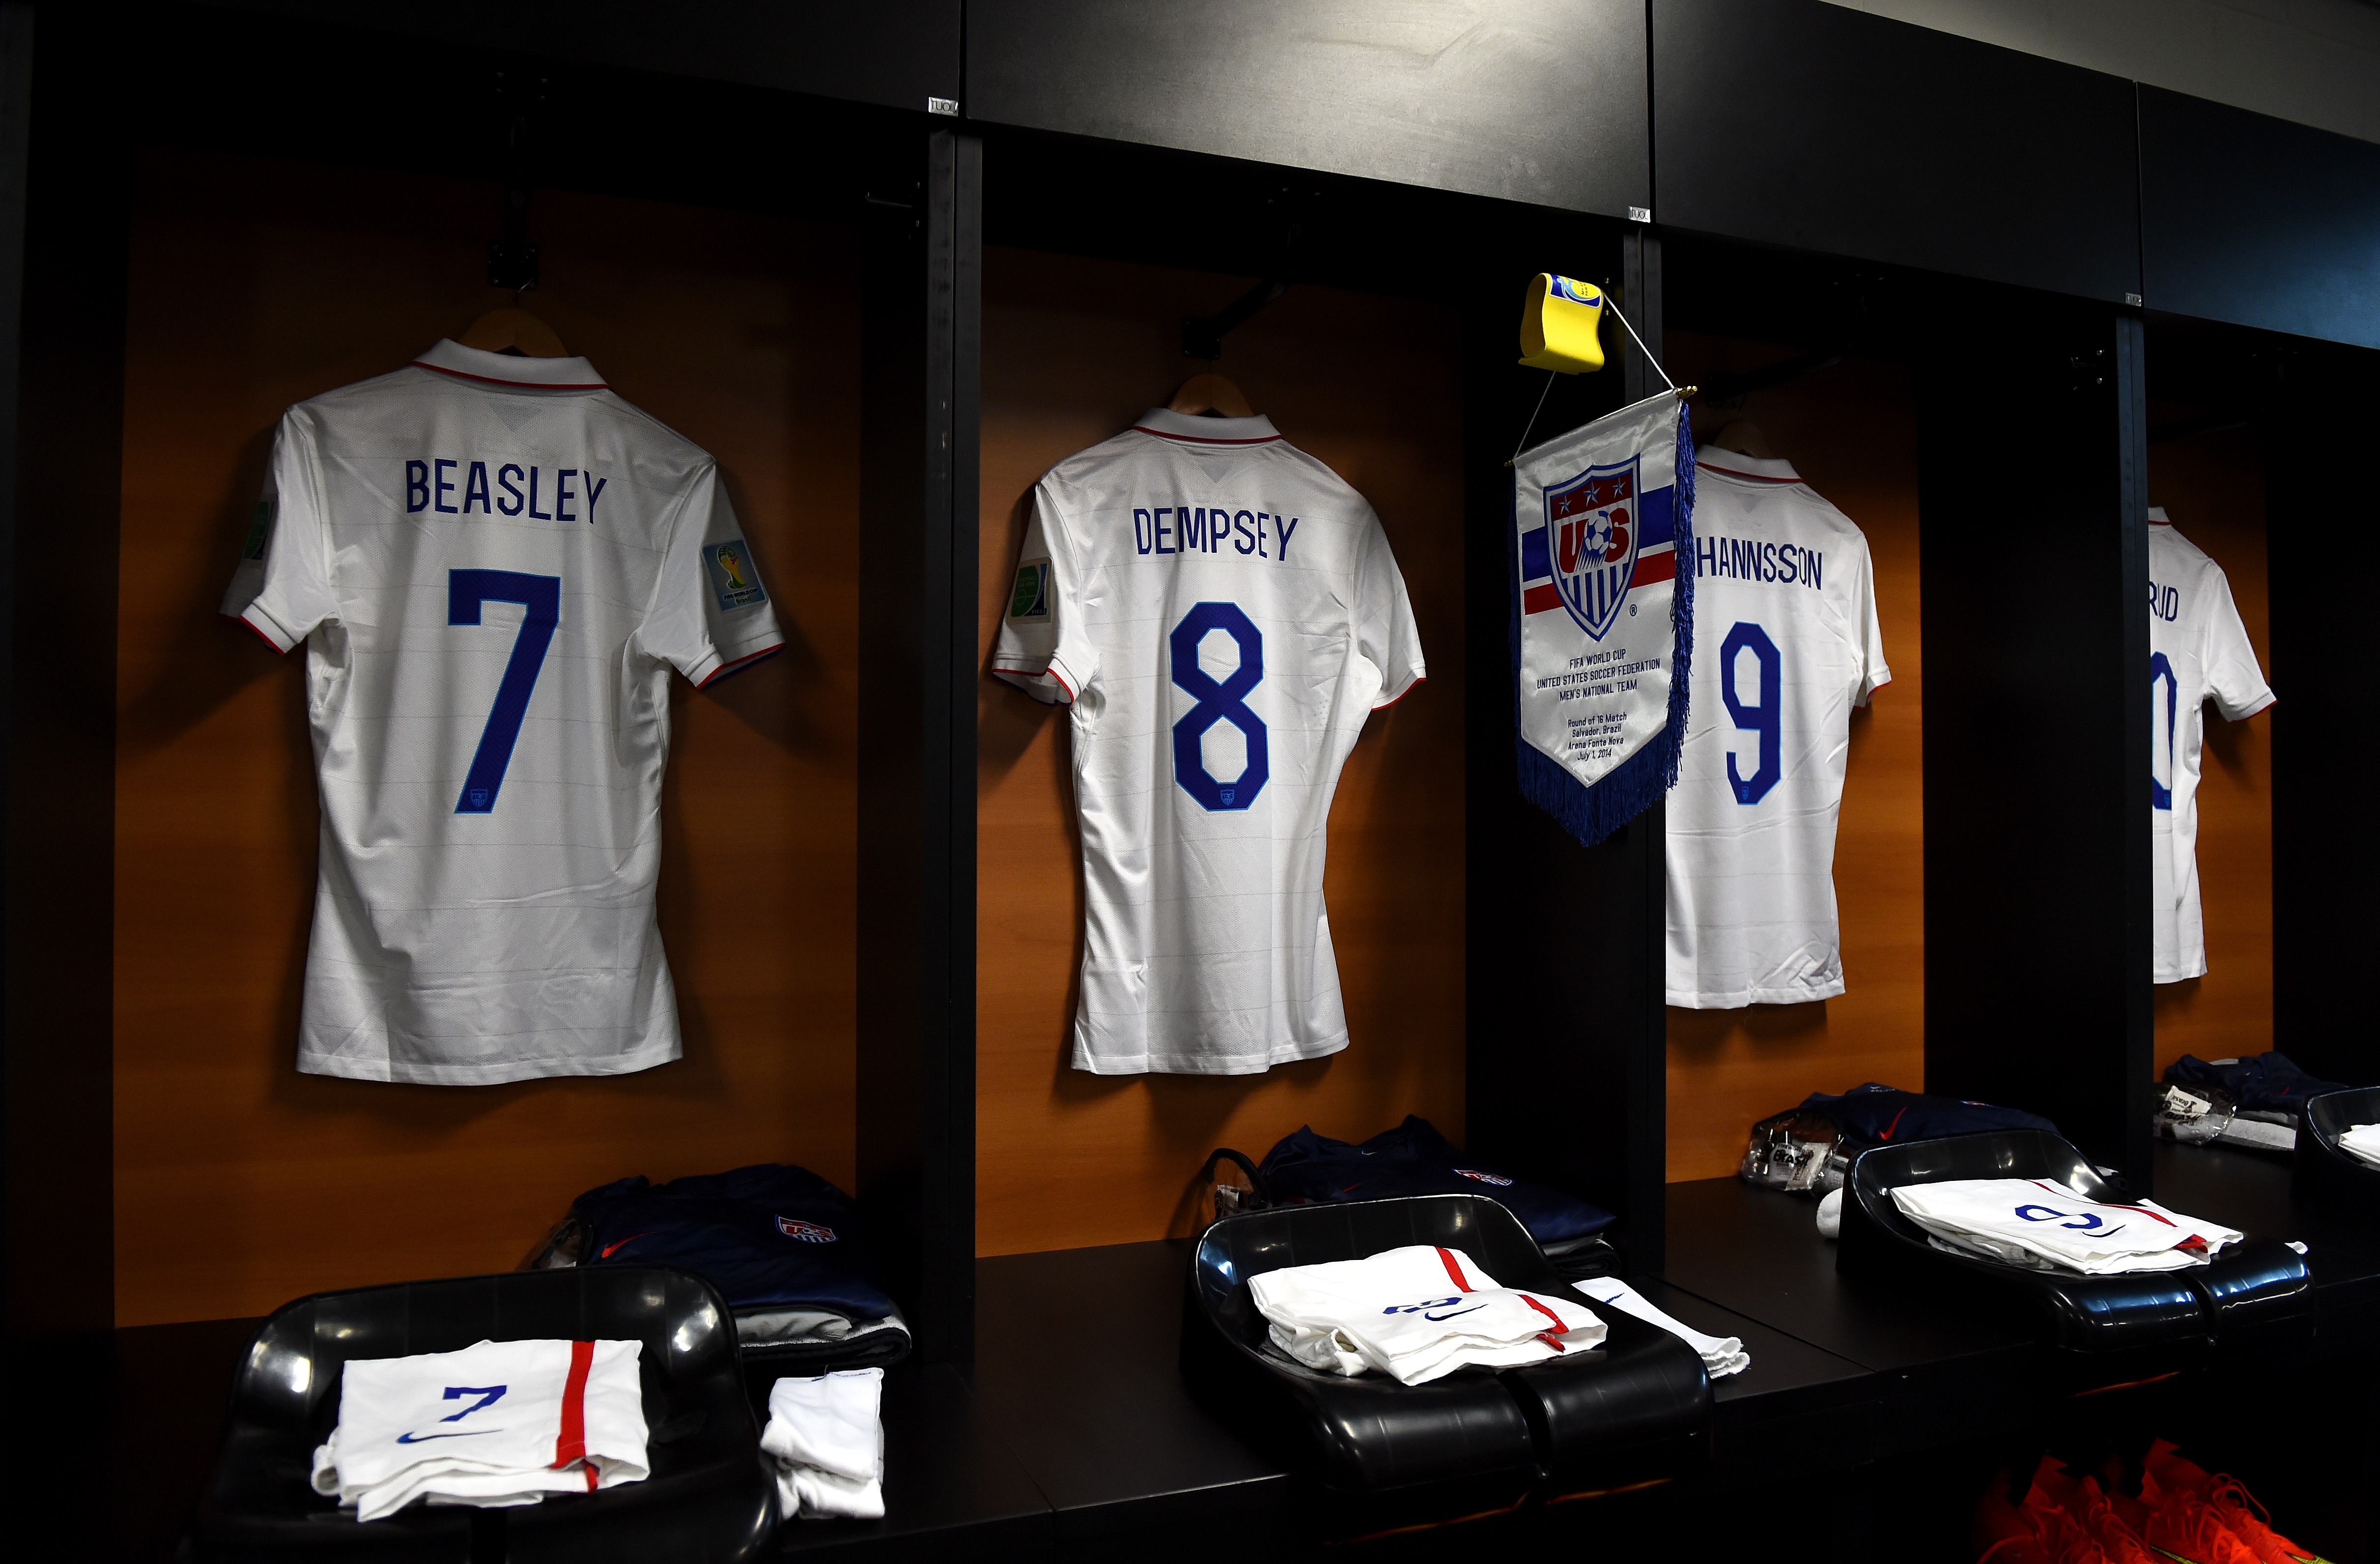 Shirts worn by the United States players hang in the dressing room prior to the 2014 FIFA World Cup Brazil Round of 16 match between Belgium and USA at Arena Fonte Nova on July 1, 2014 in Salvador, Brazil.